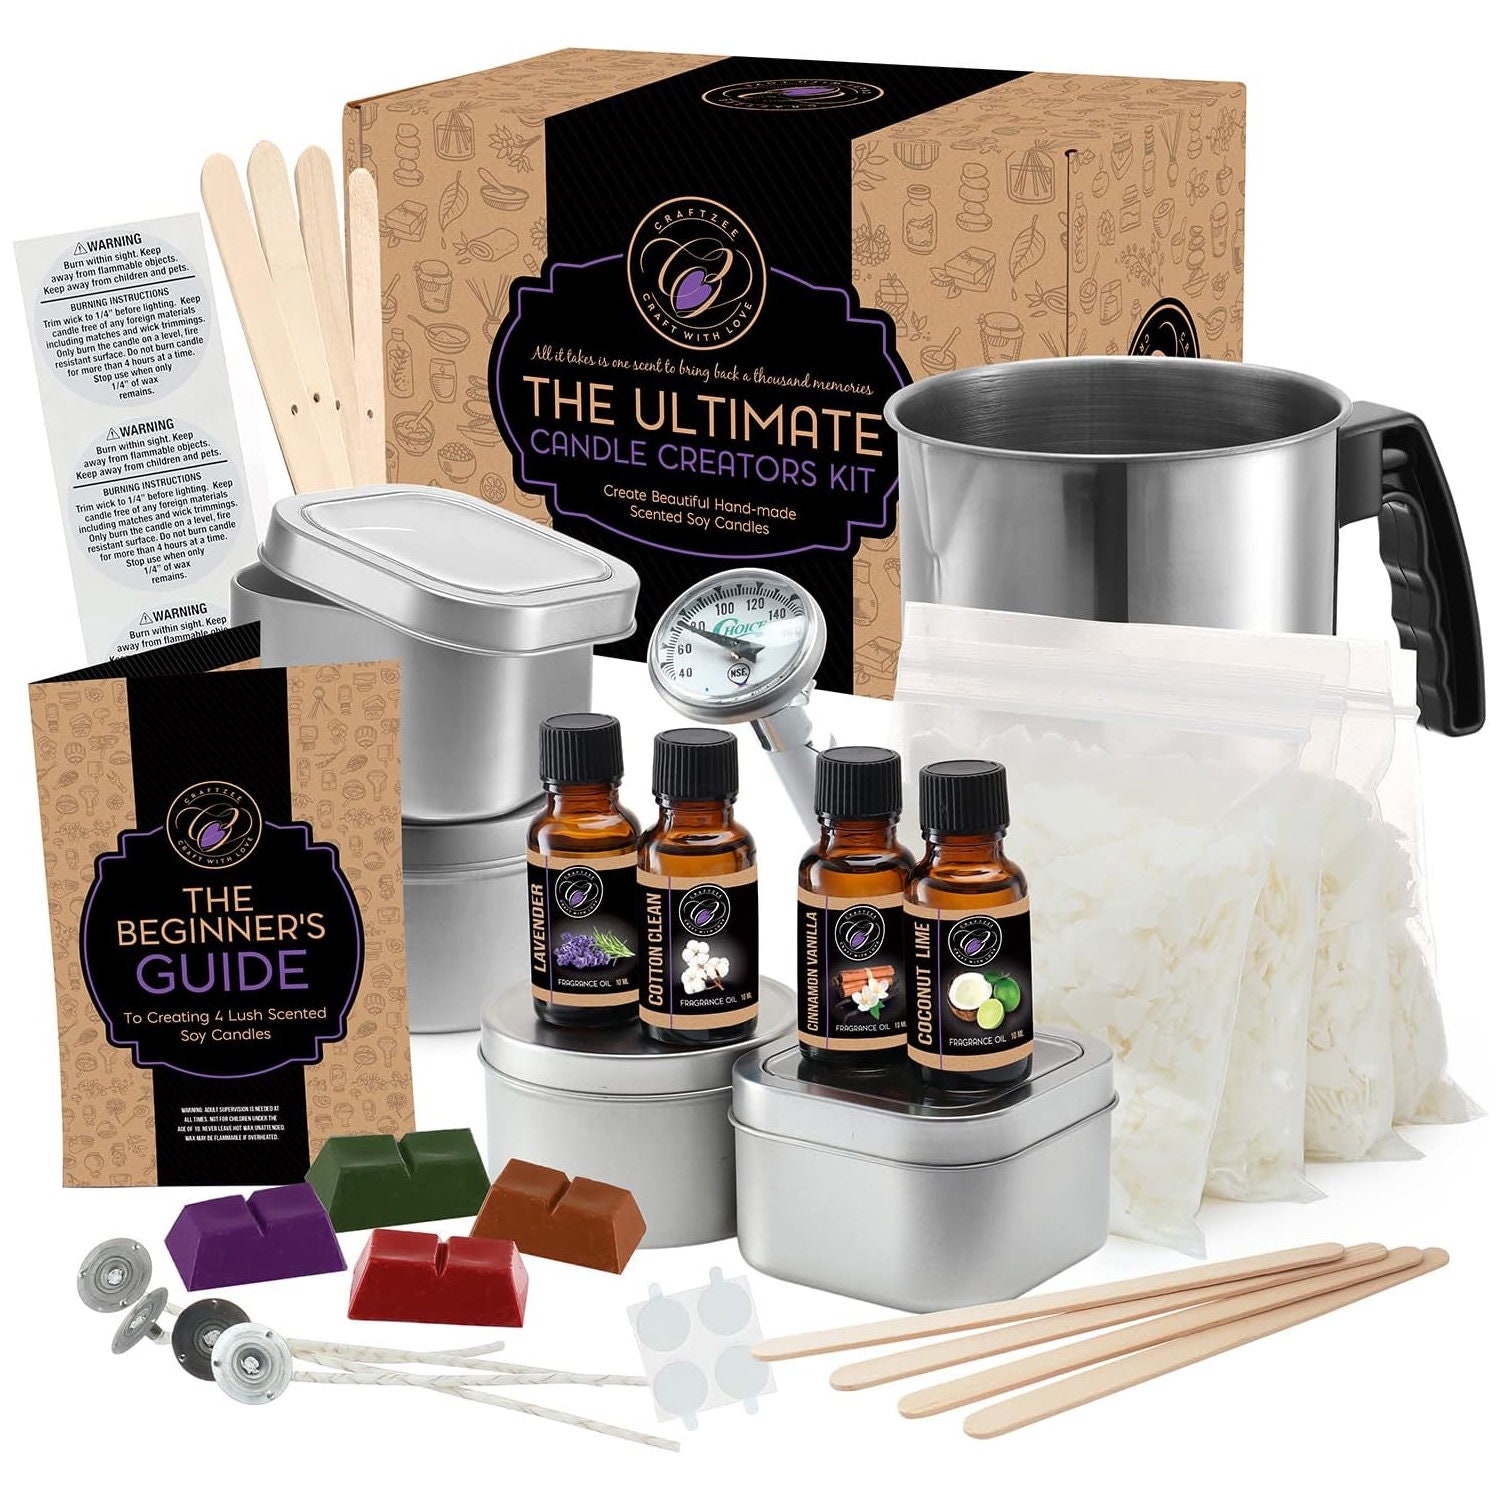 Candle Making Kit – Easy to Make Colored Candle Soy Wax Kit